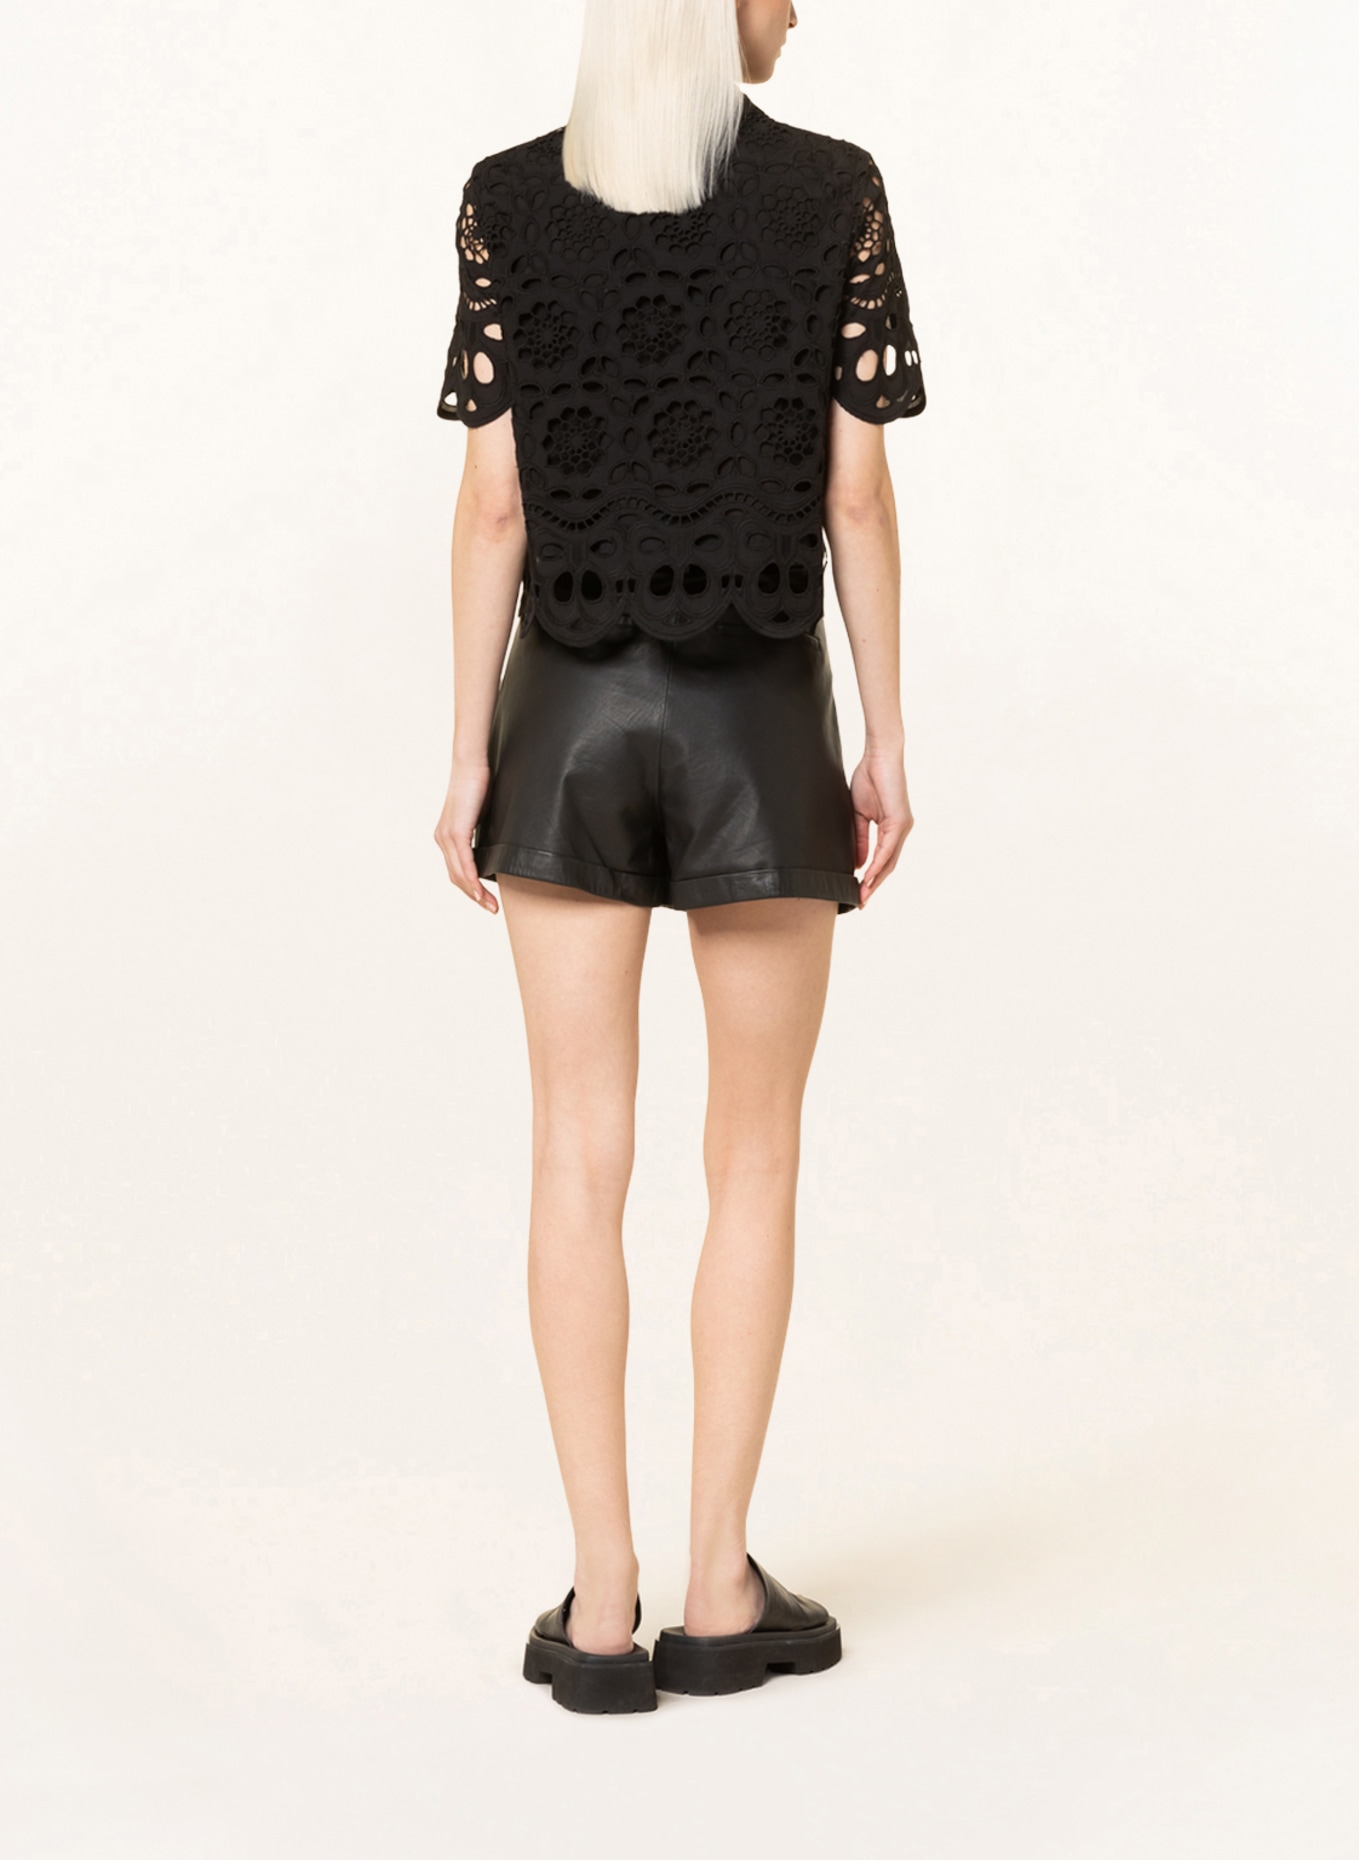 MRS & HUGS Shirt blouse made of lace, Color: BLACK (Image 3)